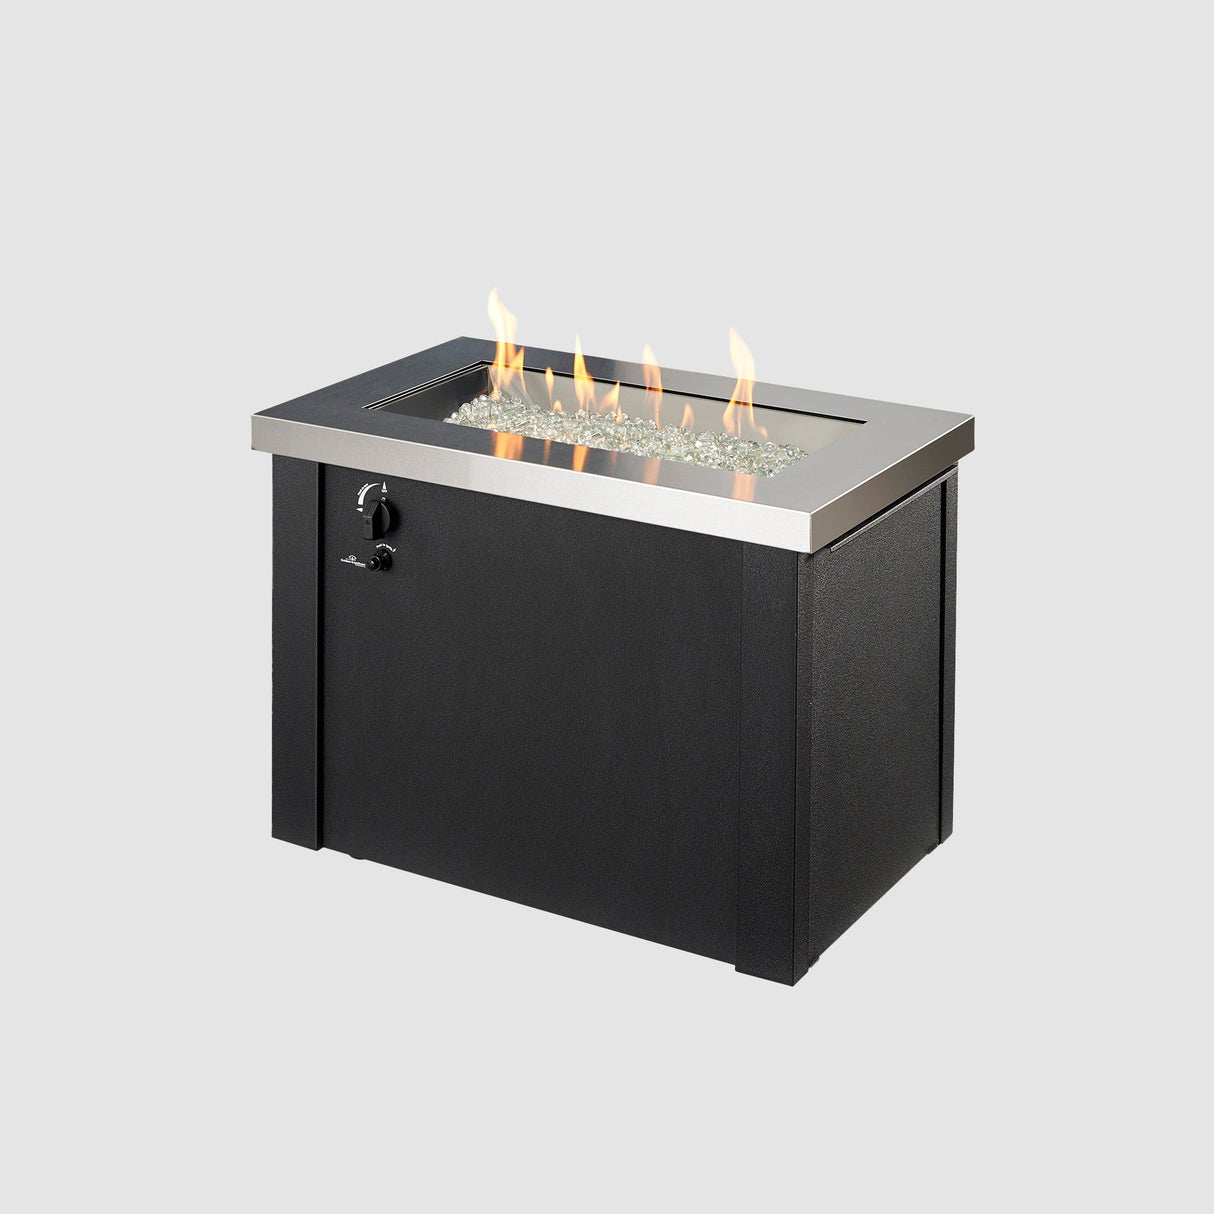 Providence Rectangular Gas Fire Pit Table